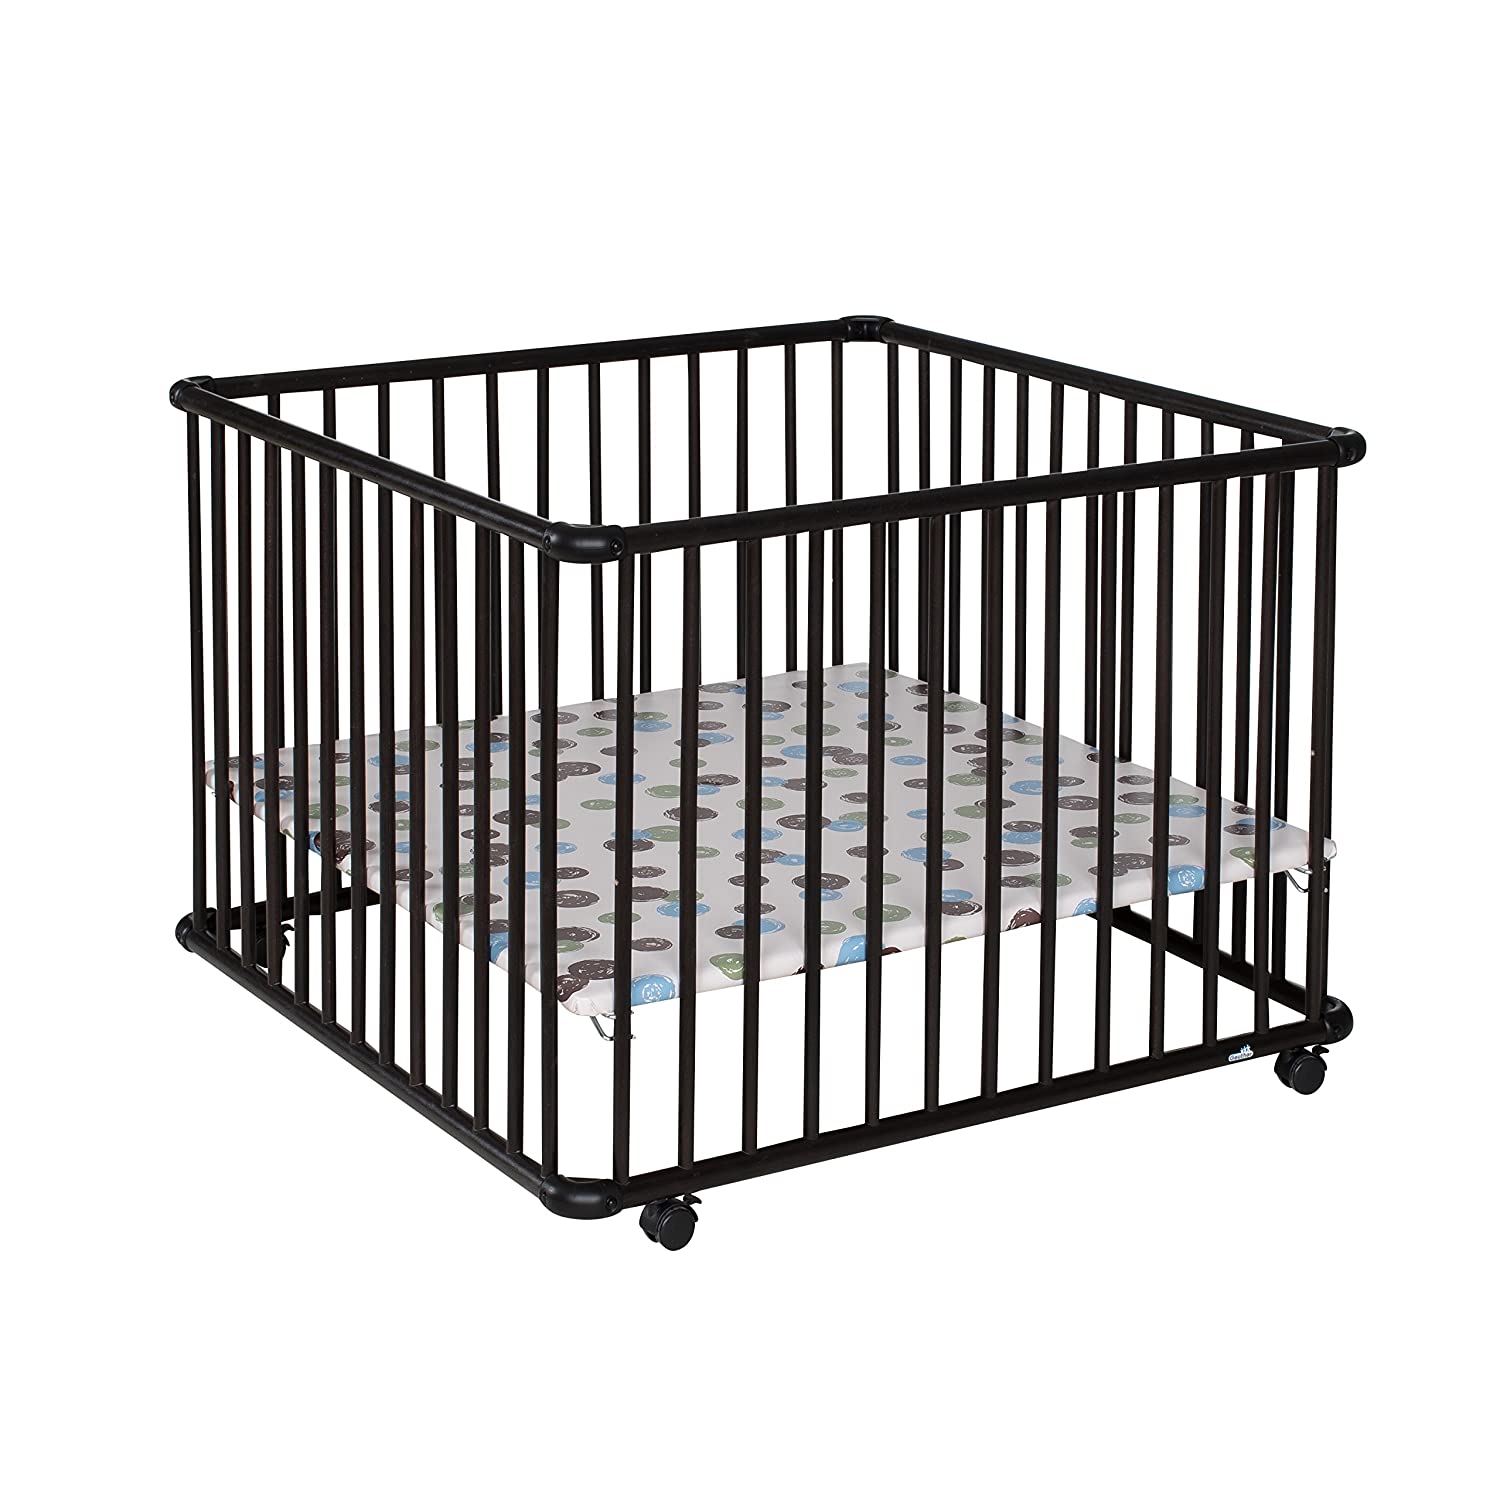 Geuther Belami Playpen With Tüv-Tested Height-Adjustable Removable Padded F